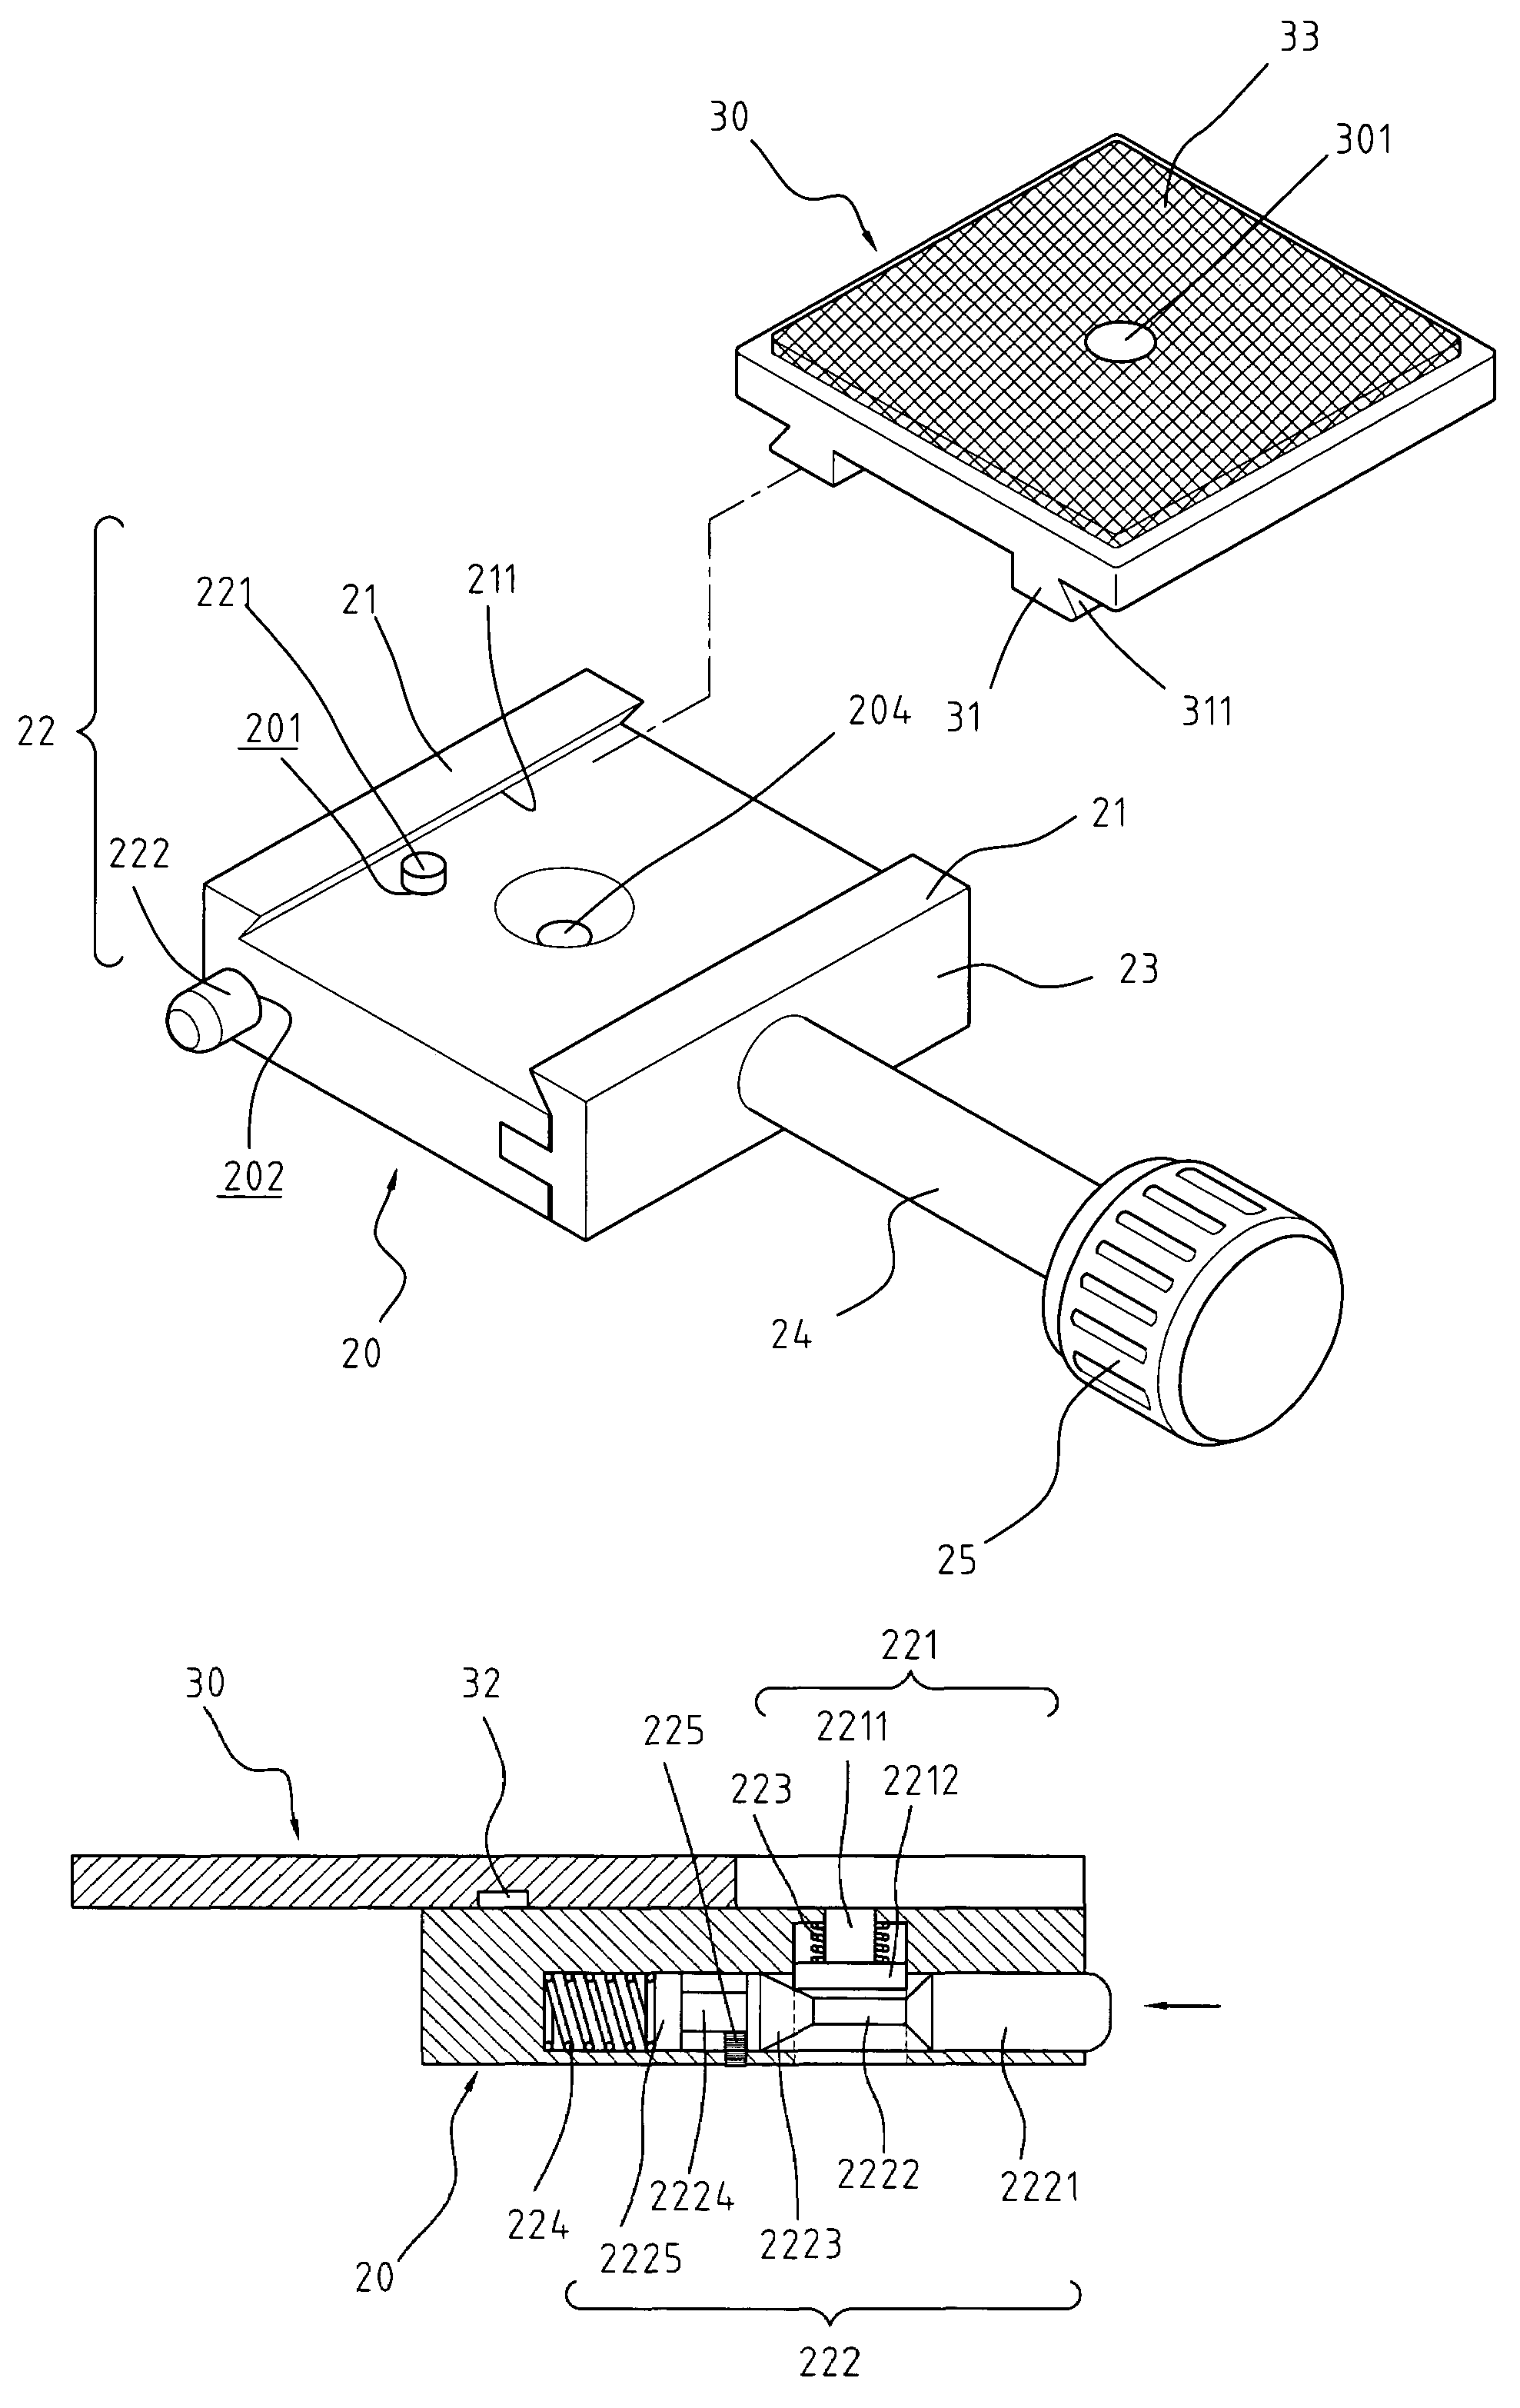 Mounting platform assembly for a stand device